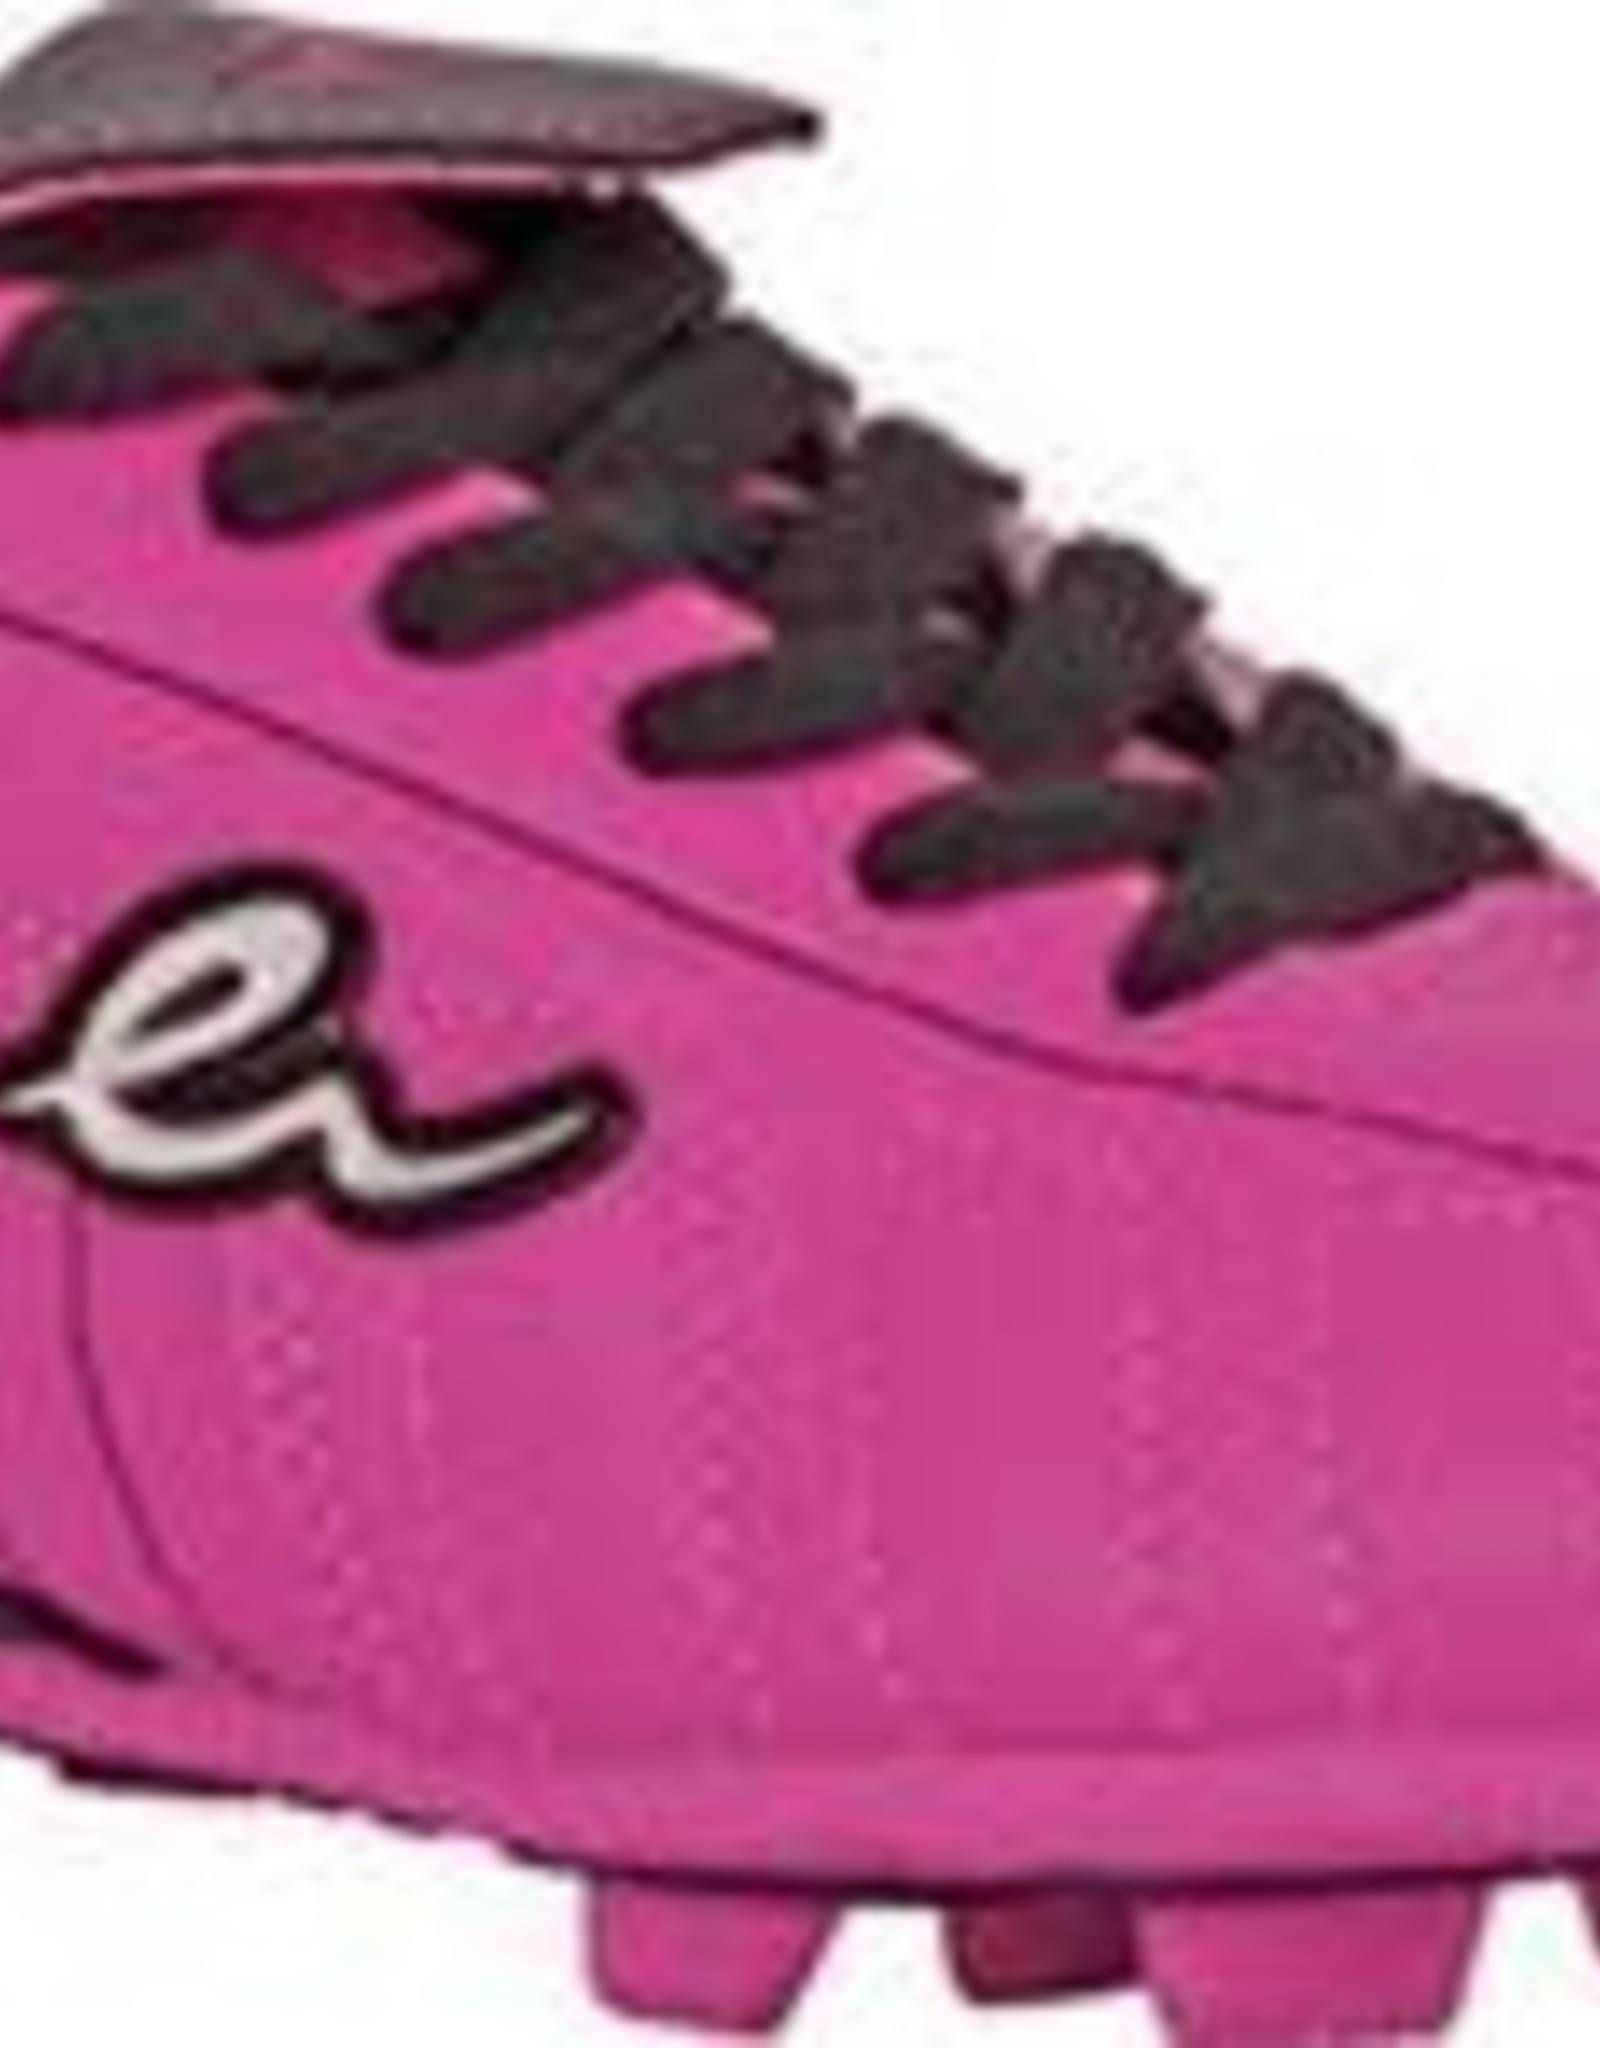 Eletto ELETTO SOULIER SOCCER AXION RB ROSE 7 SR